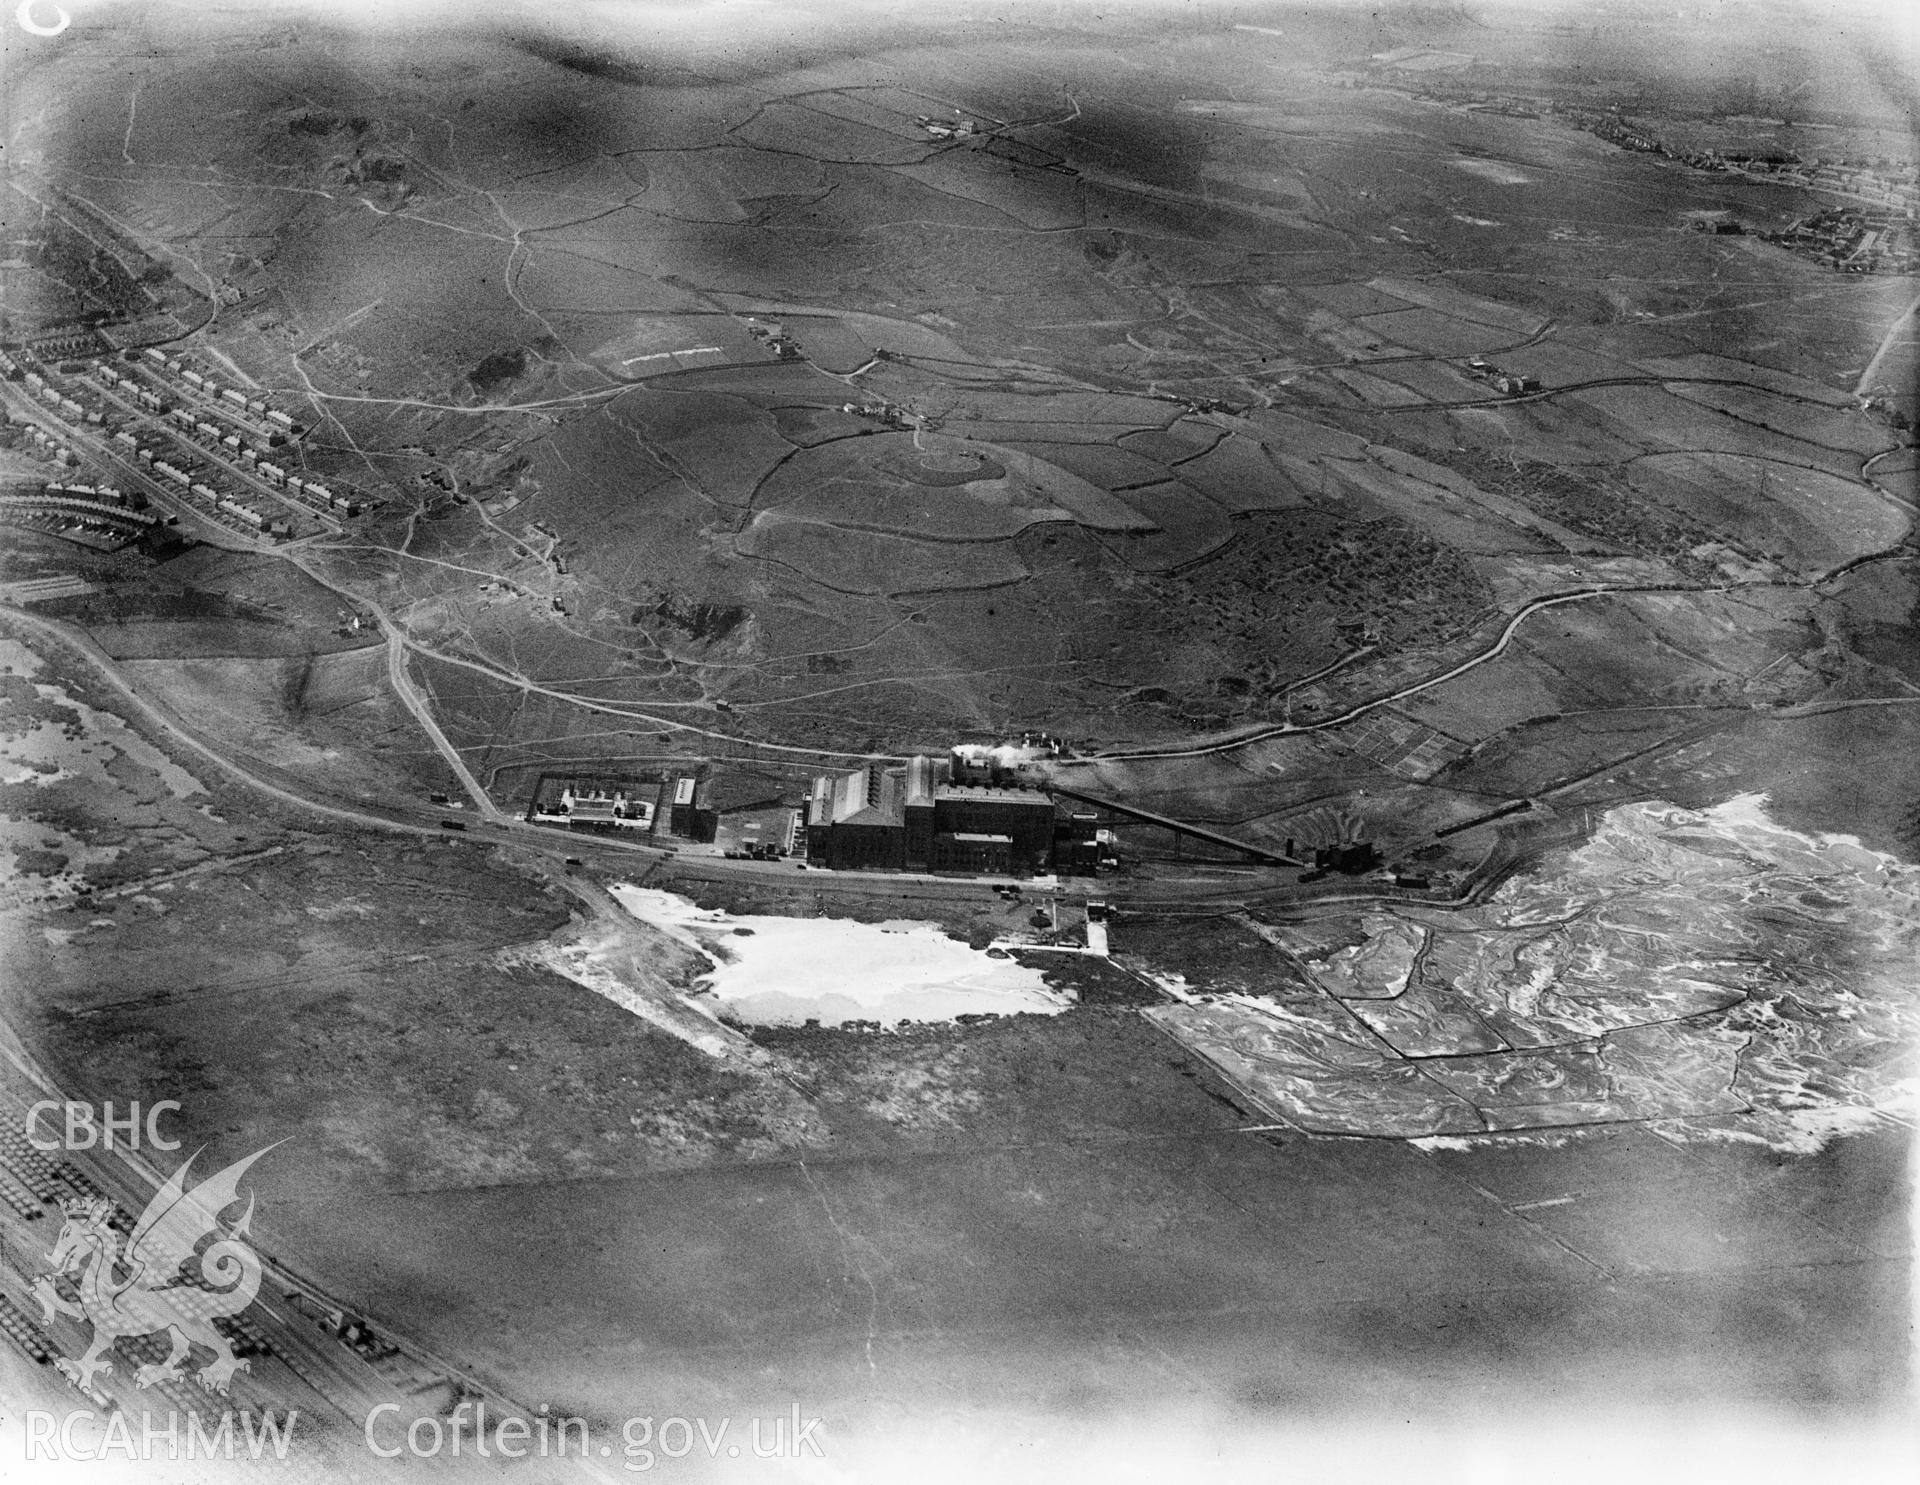 Distant view of Tir John power station, Swansea, oblique aerial view. 5?x4? black and white glass plate negative.